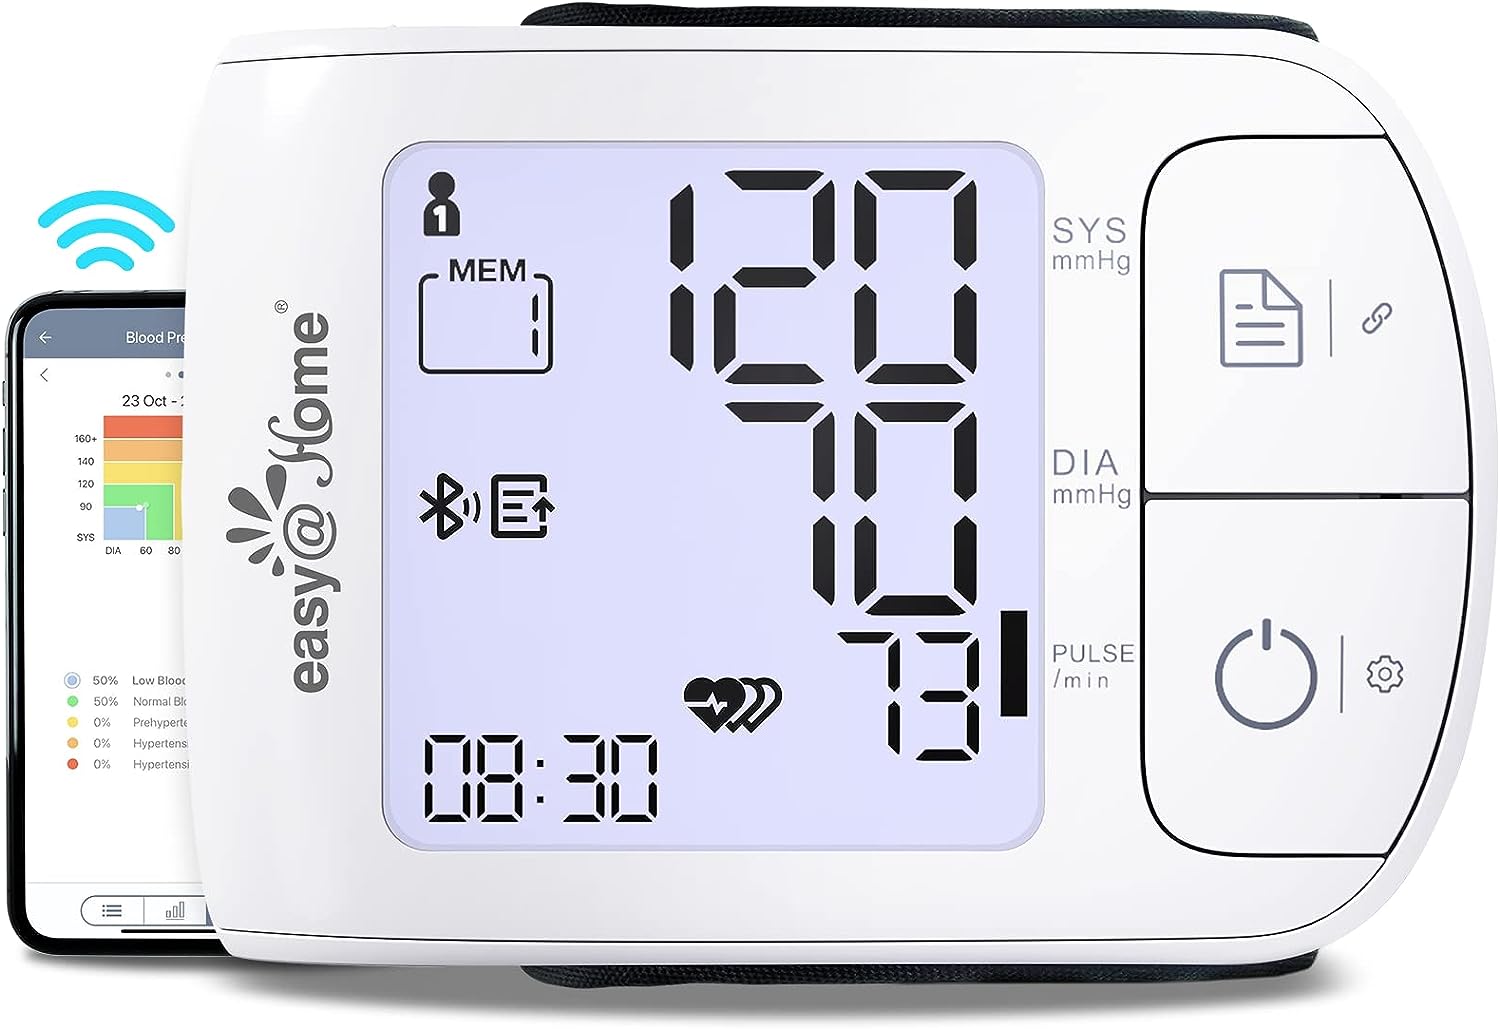 Automatic Wrist Blood Pressure Monitor: Easy@Home [...]